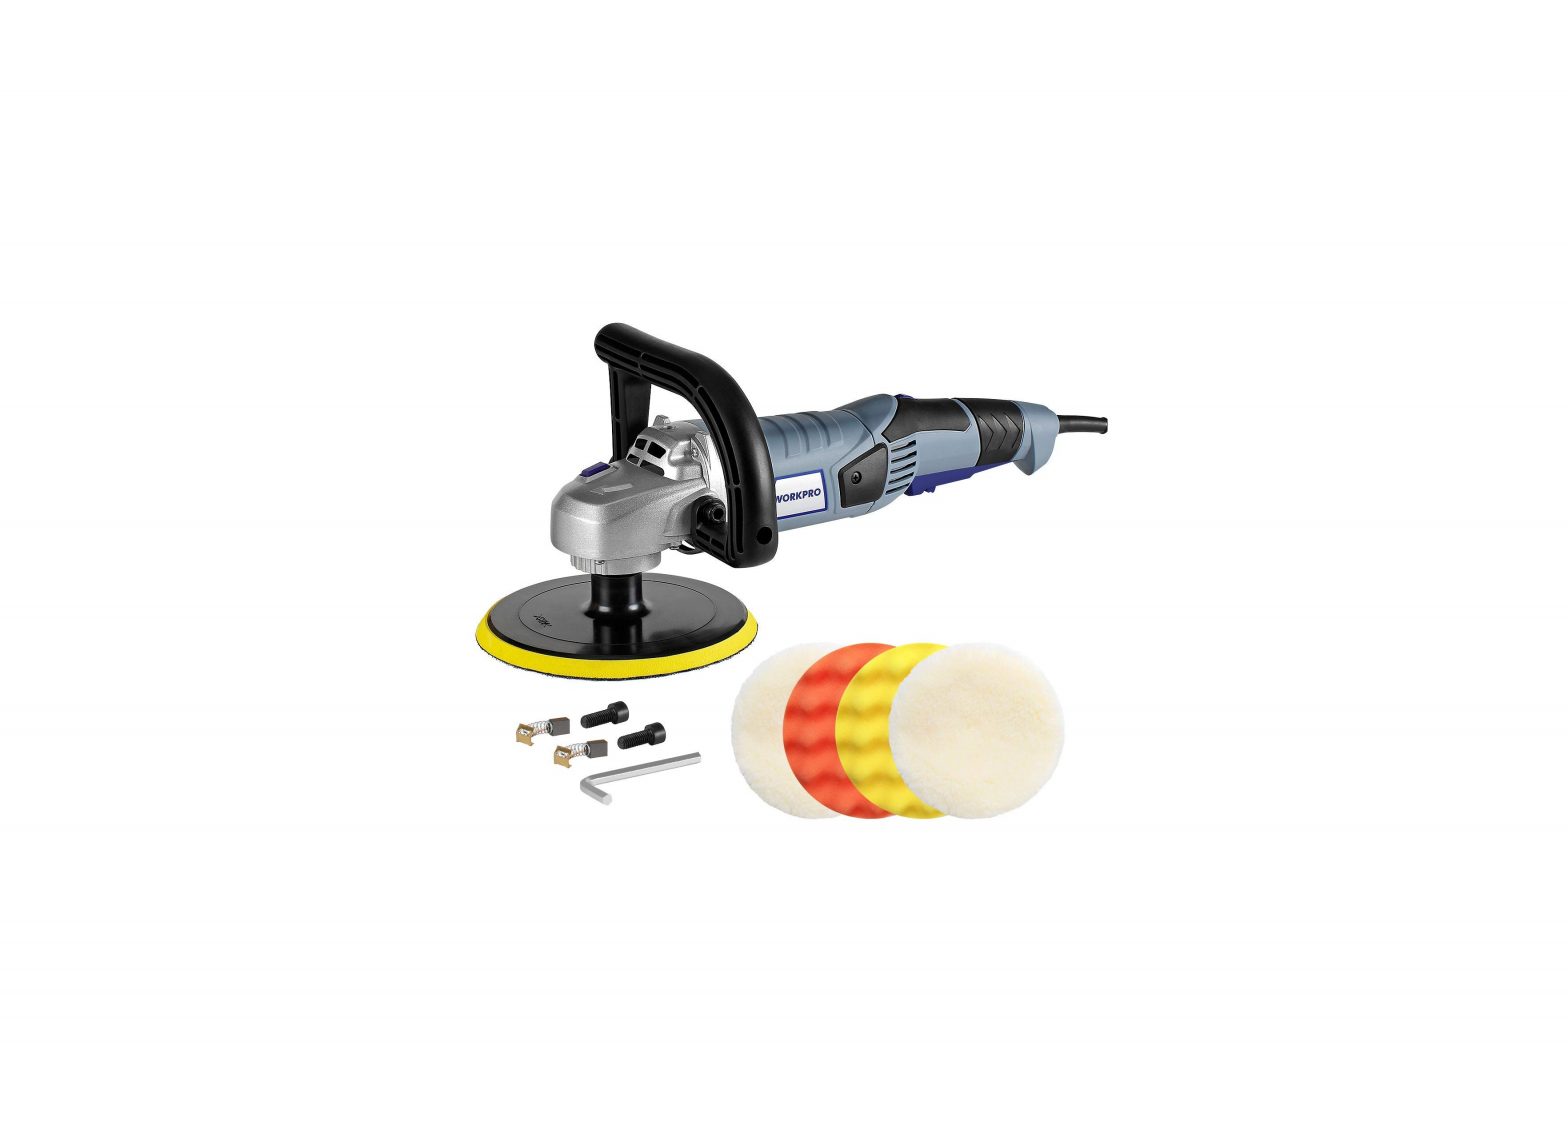 WORKPRO Angle Polisher with Variable Speed Instruction Manual